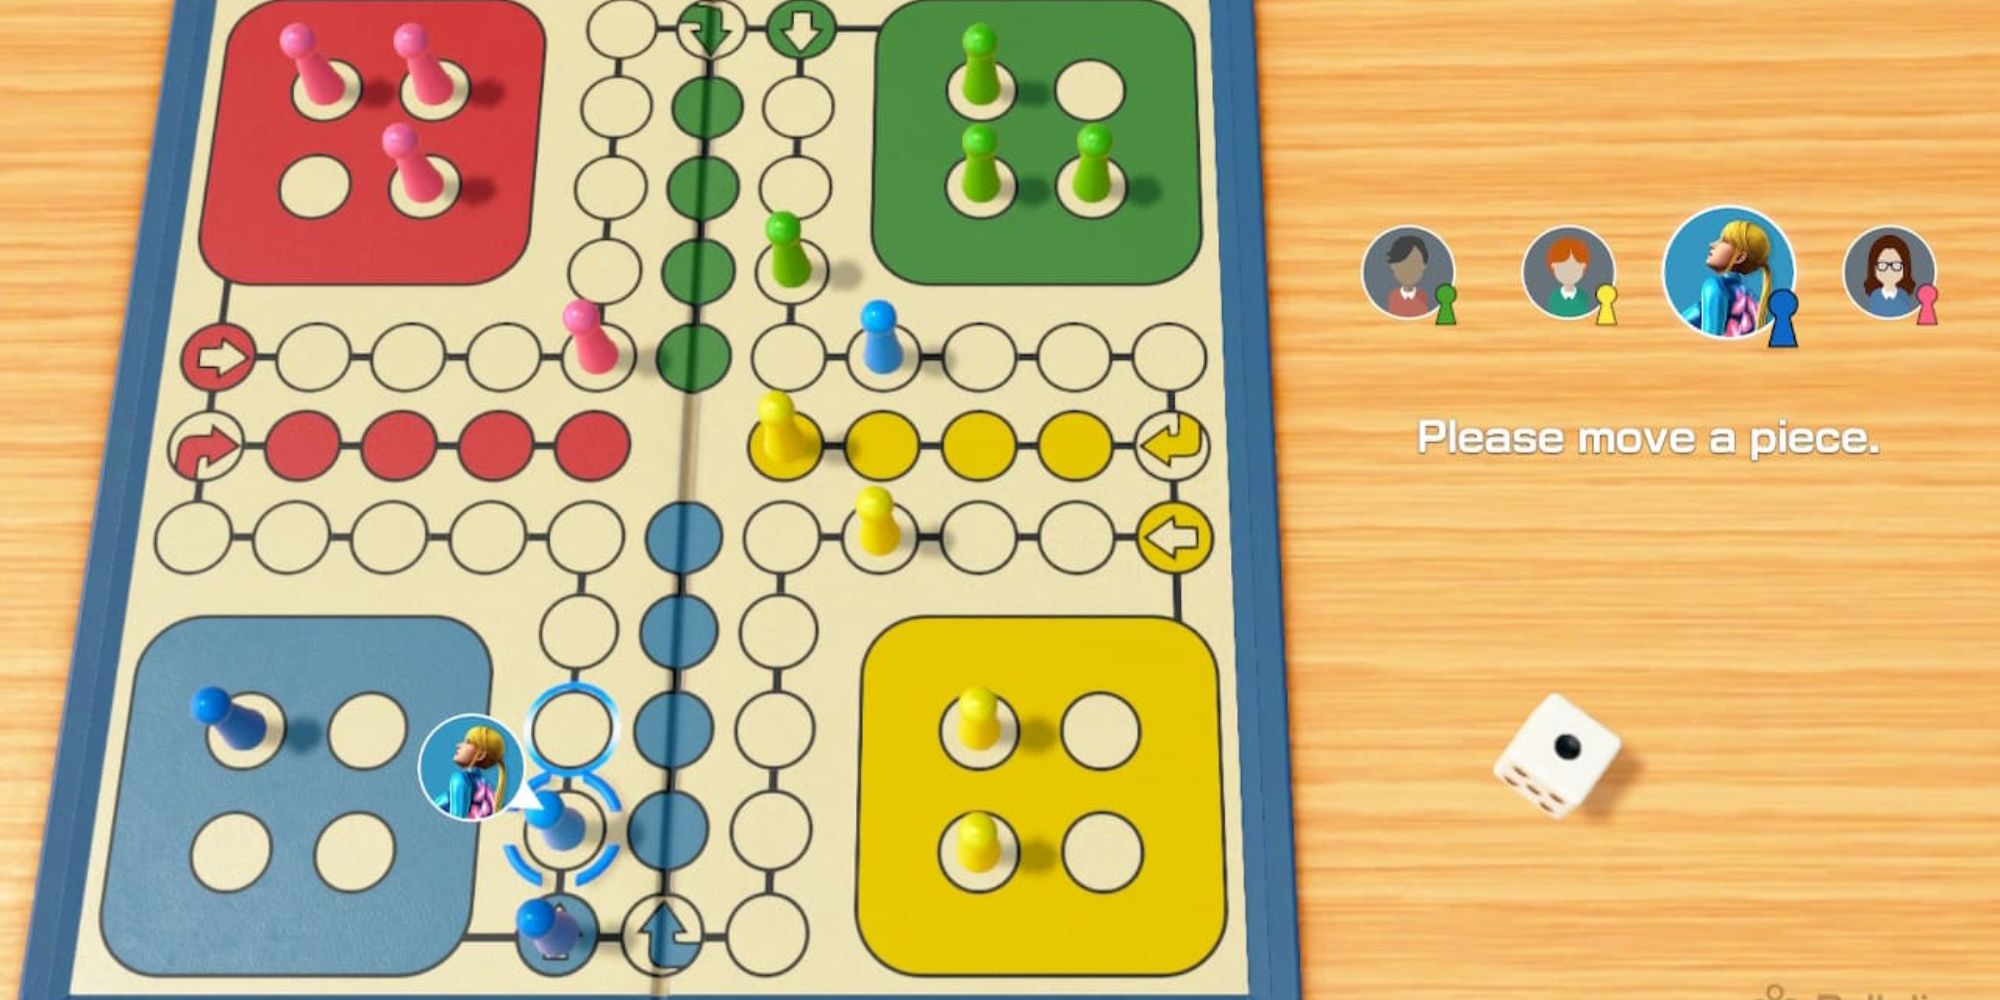 Clubhouse Games an ongoing game of Ludo with blue, yellow, green and pink pieces spread out across the board